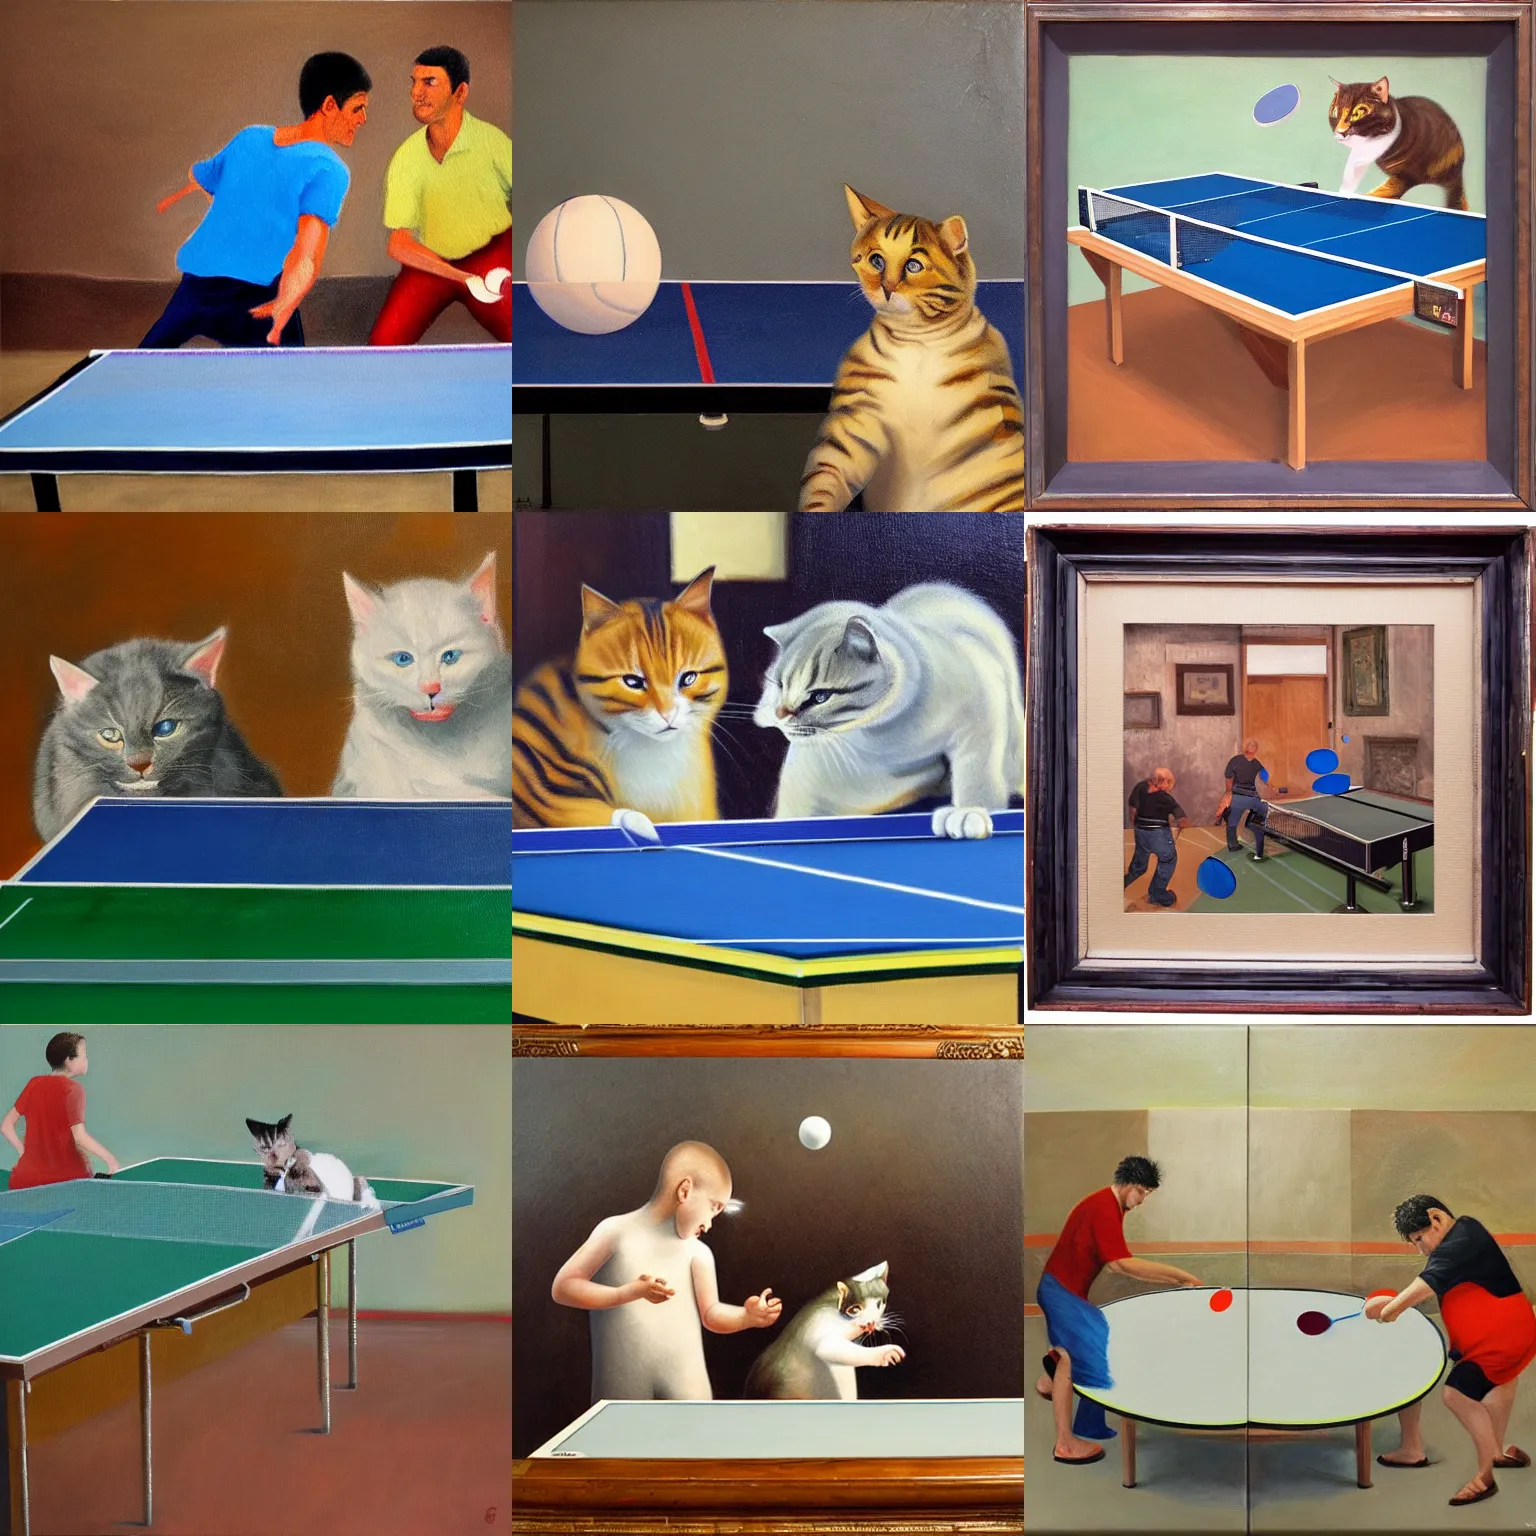 Prompt: Due gatti giocano a ping pong, oil painting